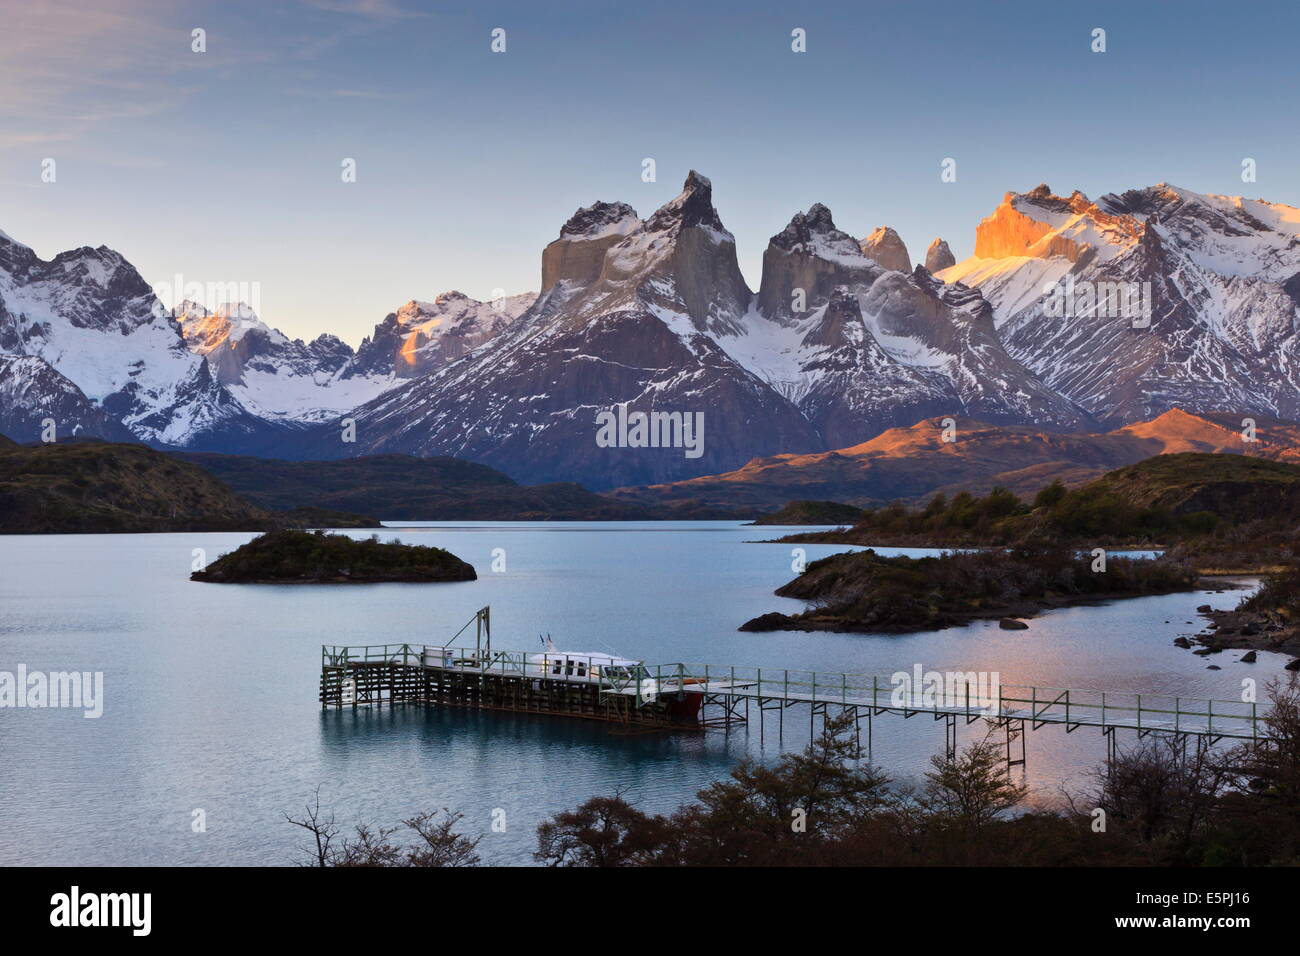 Boat dock and Paine mountains at sunset, Torres del Paine National Park, Patagonia, Chile, South America Stock Photo